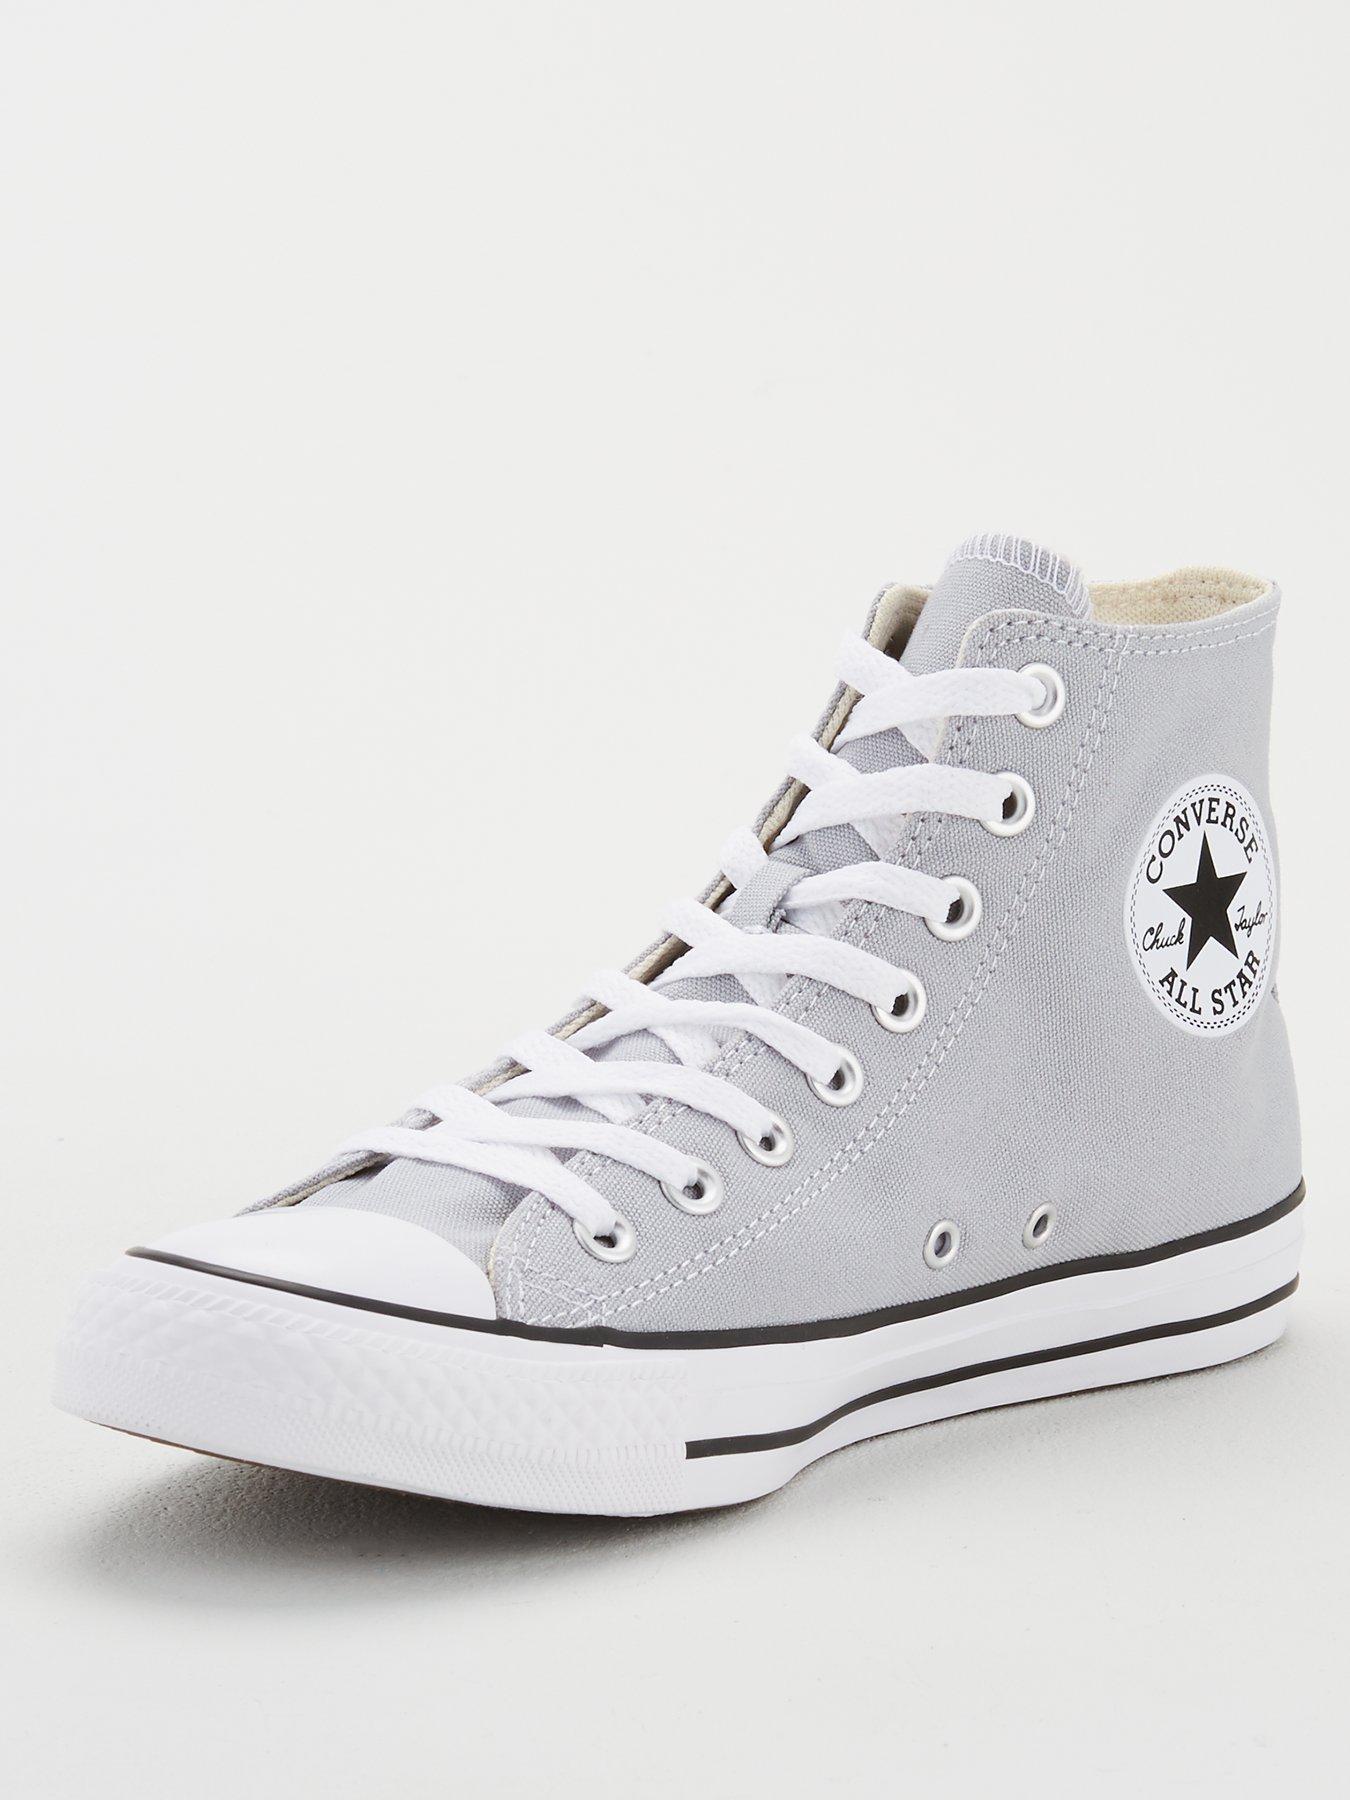 Converse Chuck Taylor All Star Trainer - Grey | very.co.uk